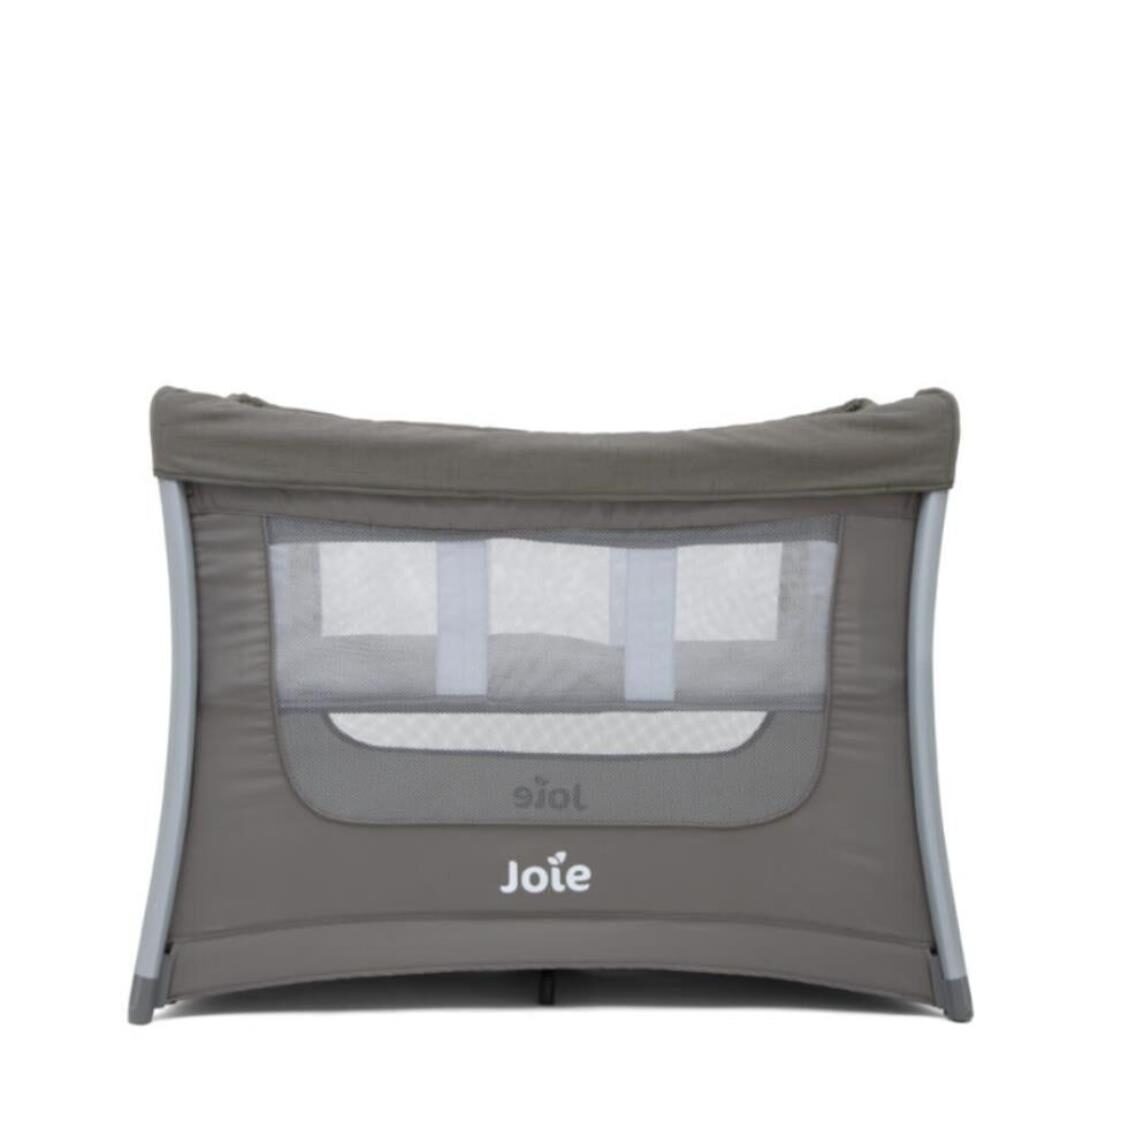 Joie Illusion Nickel Changing Table